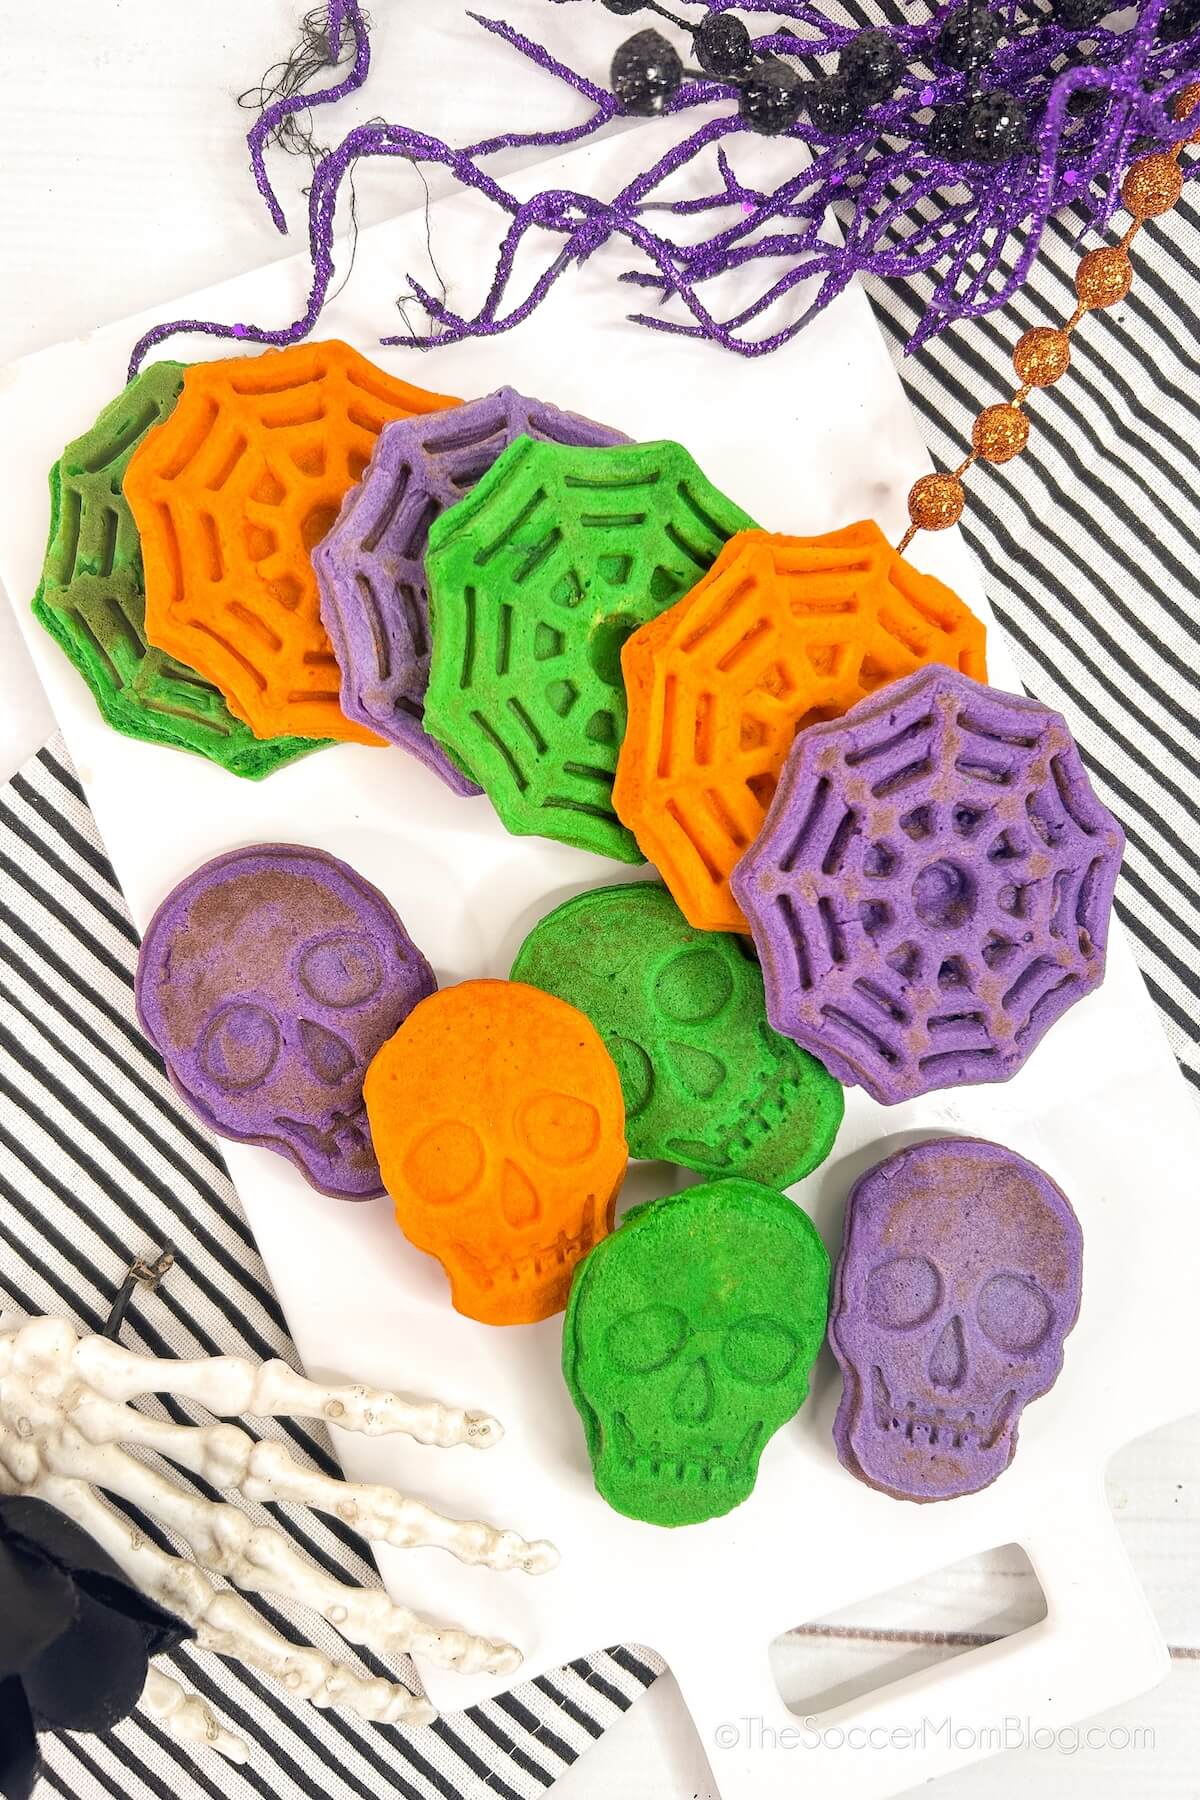 a plate of waffles shaped like skulls and spiderwebs, in orange, green and purple